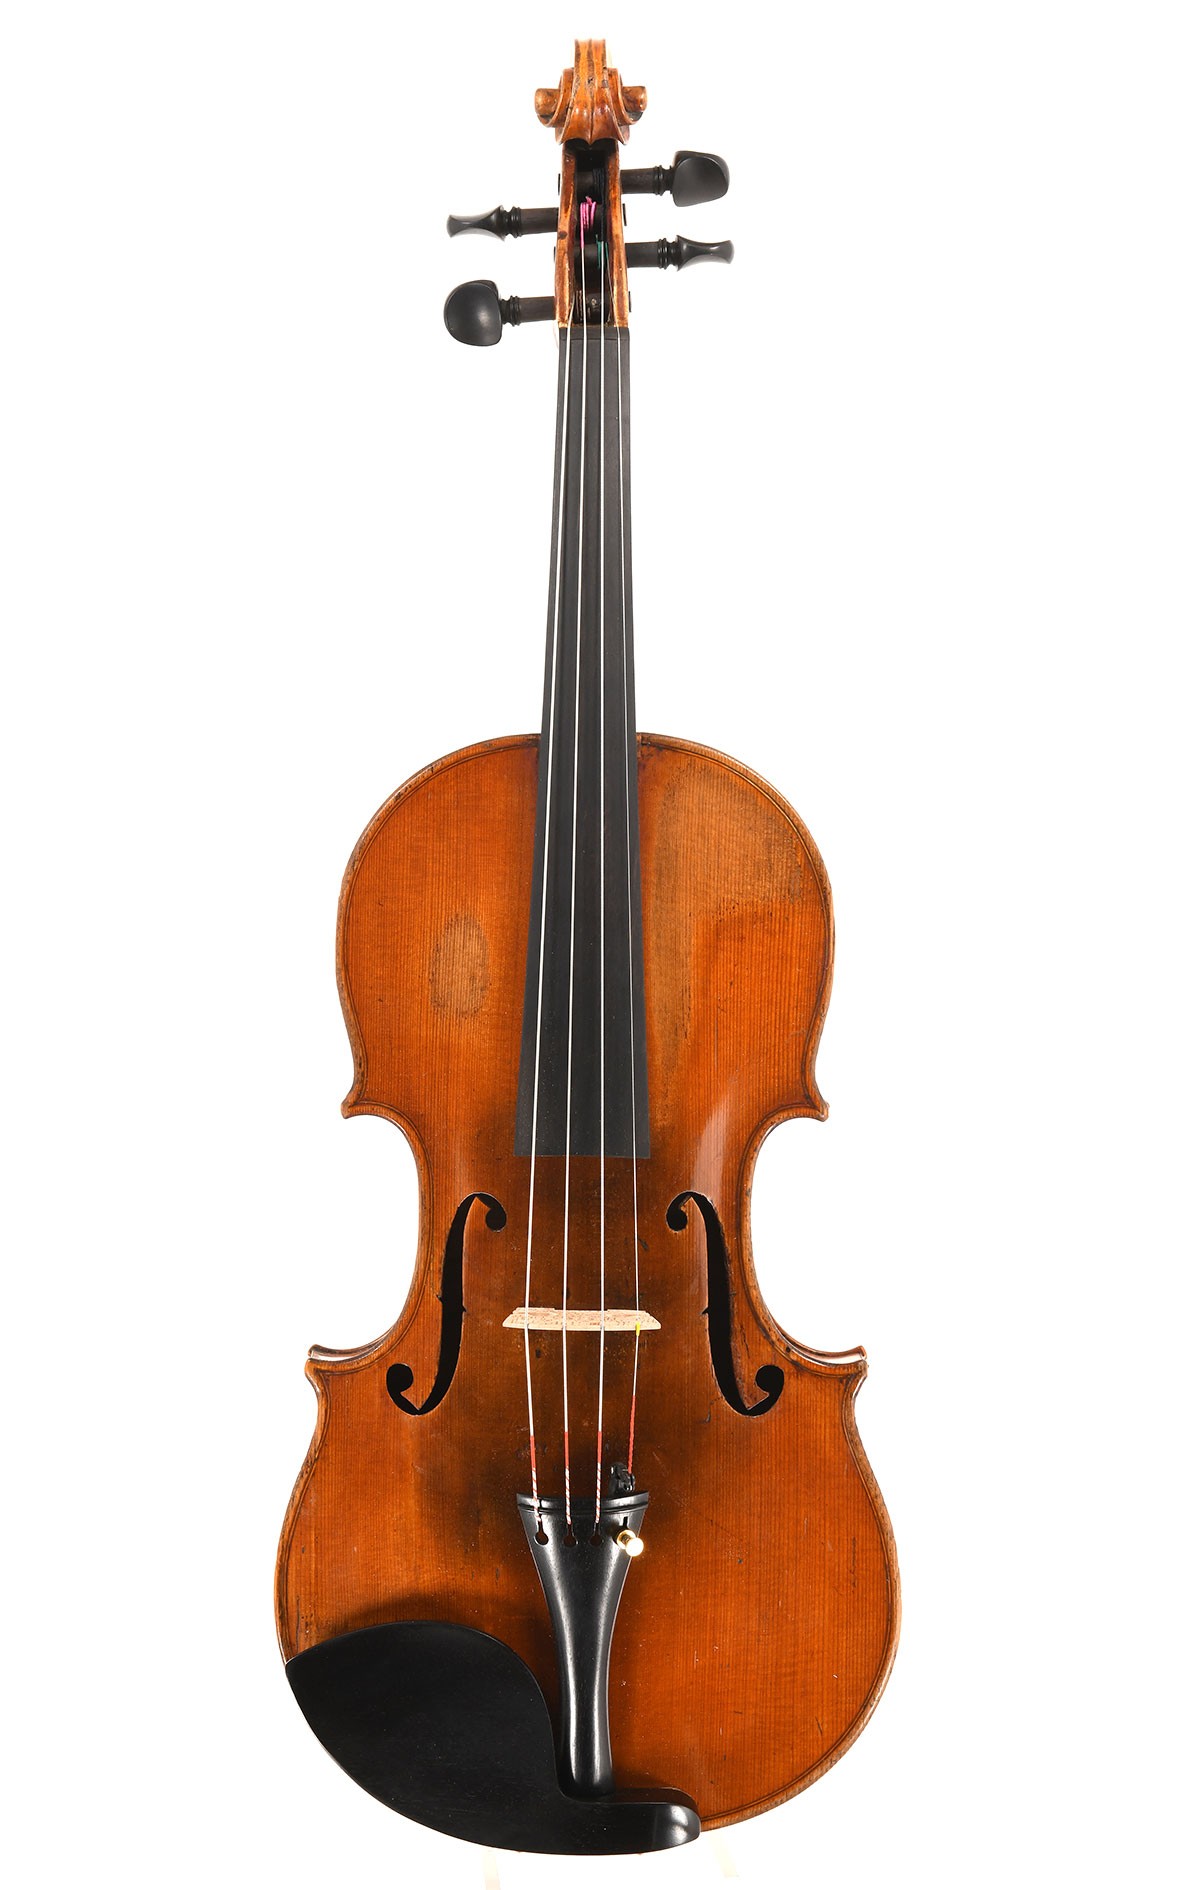 Historic French violin by Jean-Baptiste Grand-Gérard, made 1810/1820